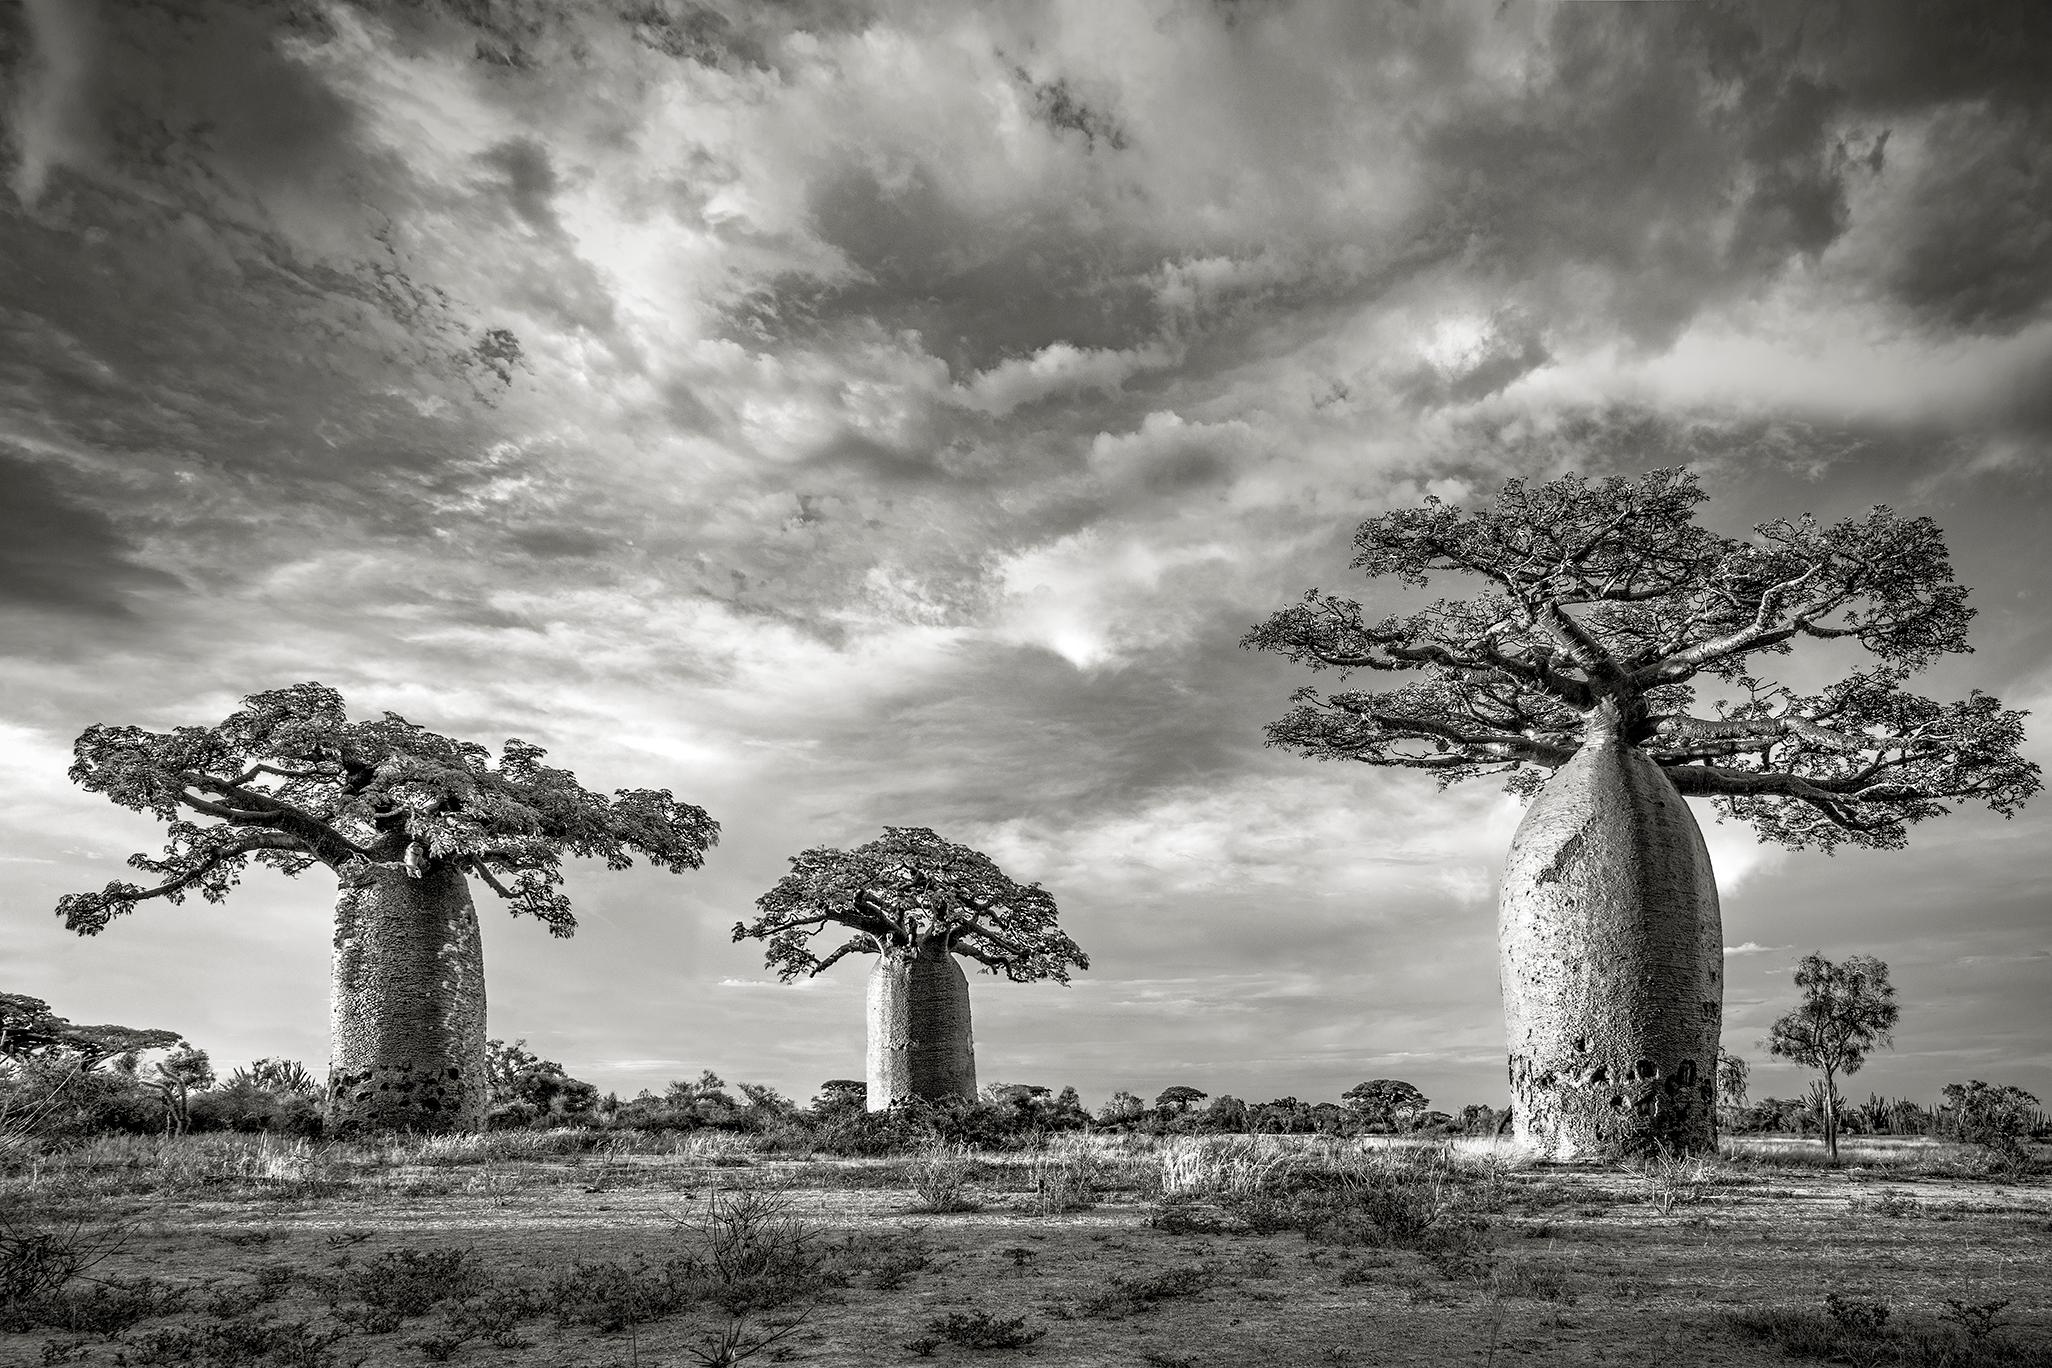 Beth Moon Black and White Photograph - BAOBABS V, Andombiry Forest